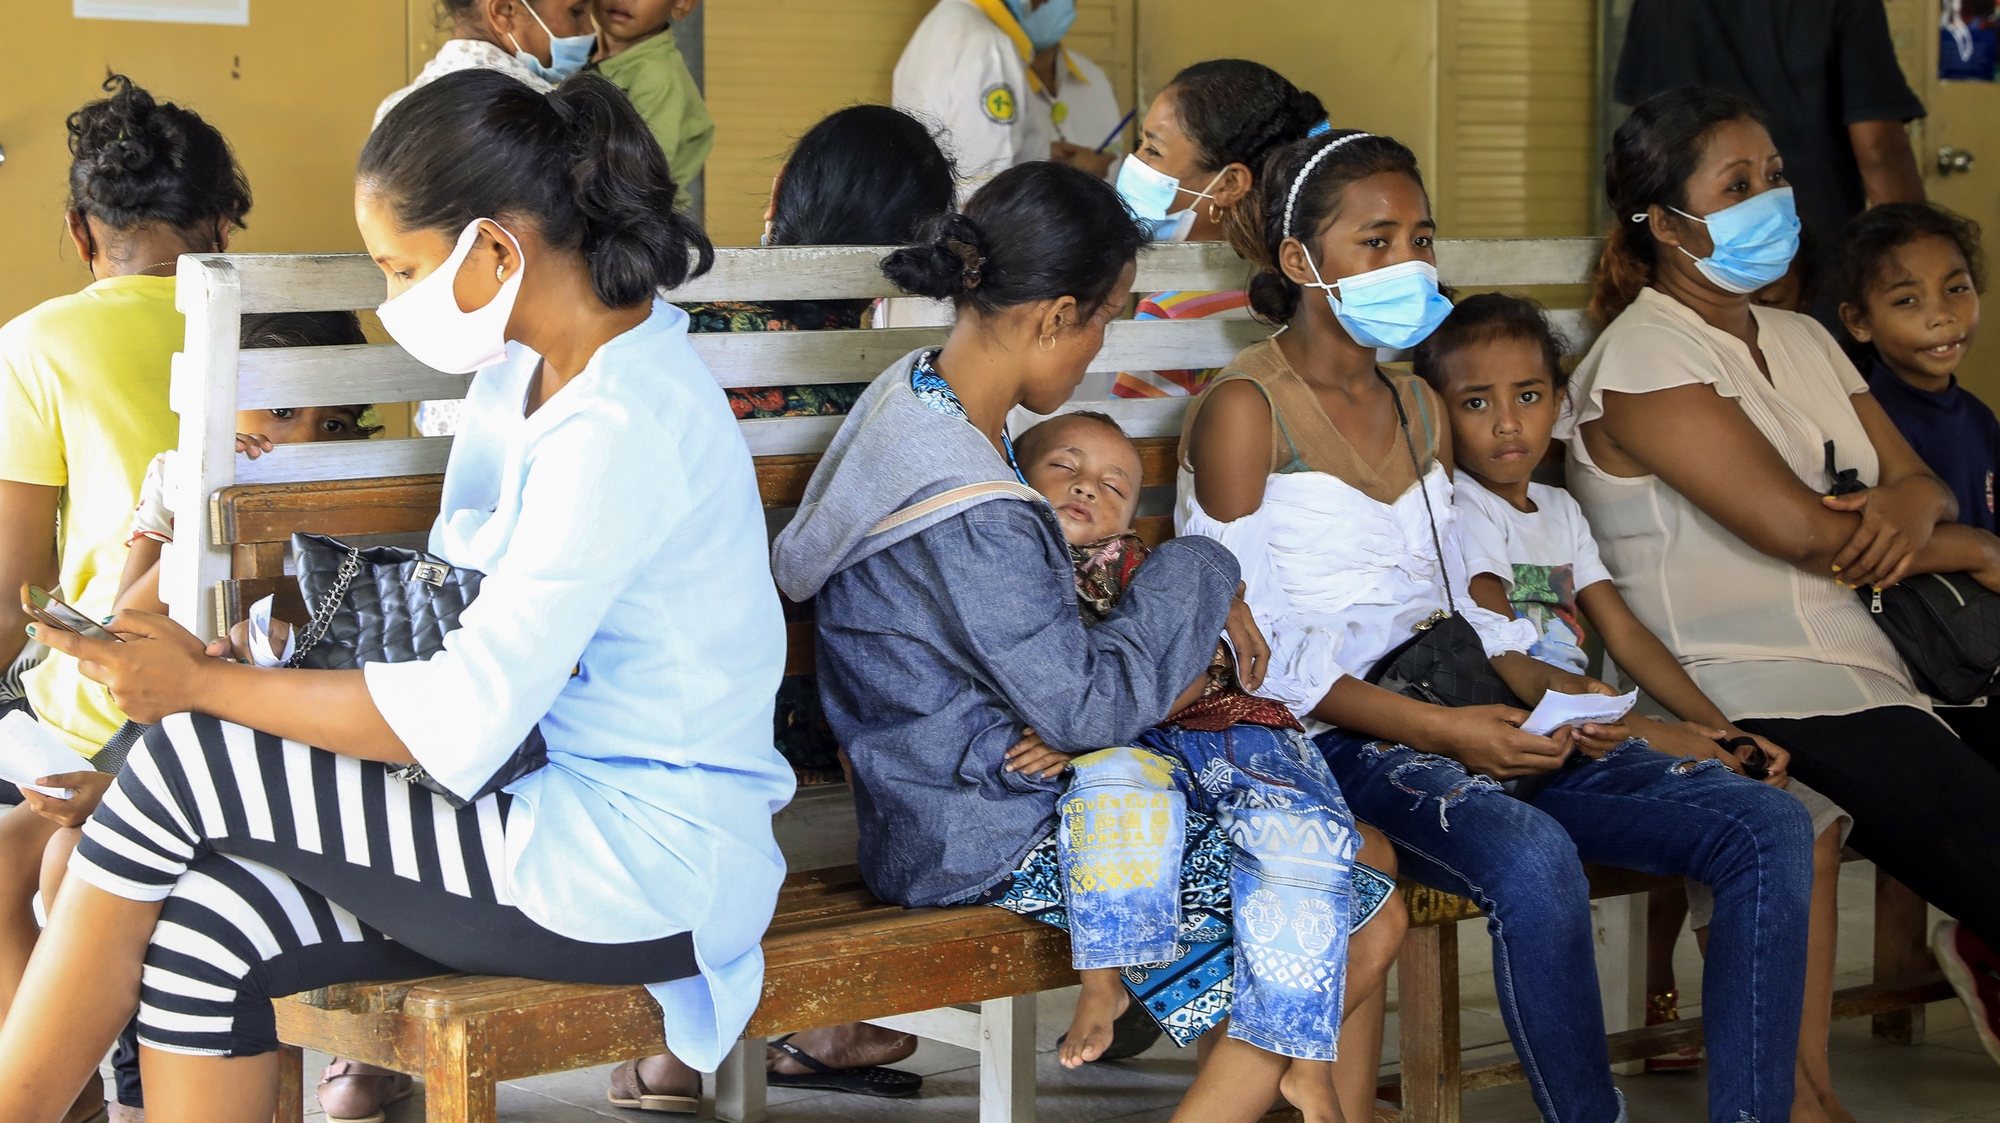 epa08936478 People wait for their turn to get a medical check up amid the ongoing COVID-19 pandemic at a clinic in Dili, East Timor, also known as Timor Leste, 07 January 2021 (issued 14 January 2021). According to reports Timor Leste is considered successful in overcoming the pandemic and recorded as the second-smallest outbreak in Southeast Asia after Laos. Timor Leste has 49 cases with zero death while the neighbouring country Indonesia is struggling as one of the worst outbreaks in the region. The country imposed a state of emergency a week after the Catholic-majority nation reported its first case on 21 March 2020, and enforced strict border controls.  EPA/ANTONIO DASIPARU